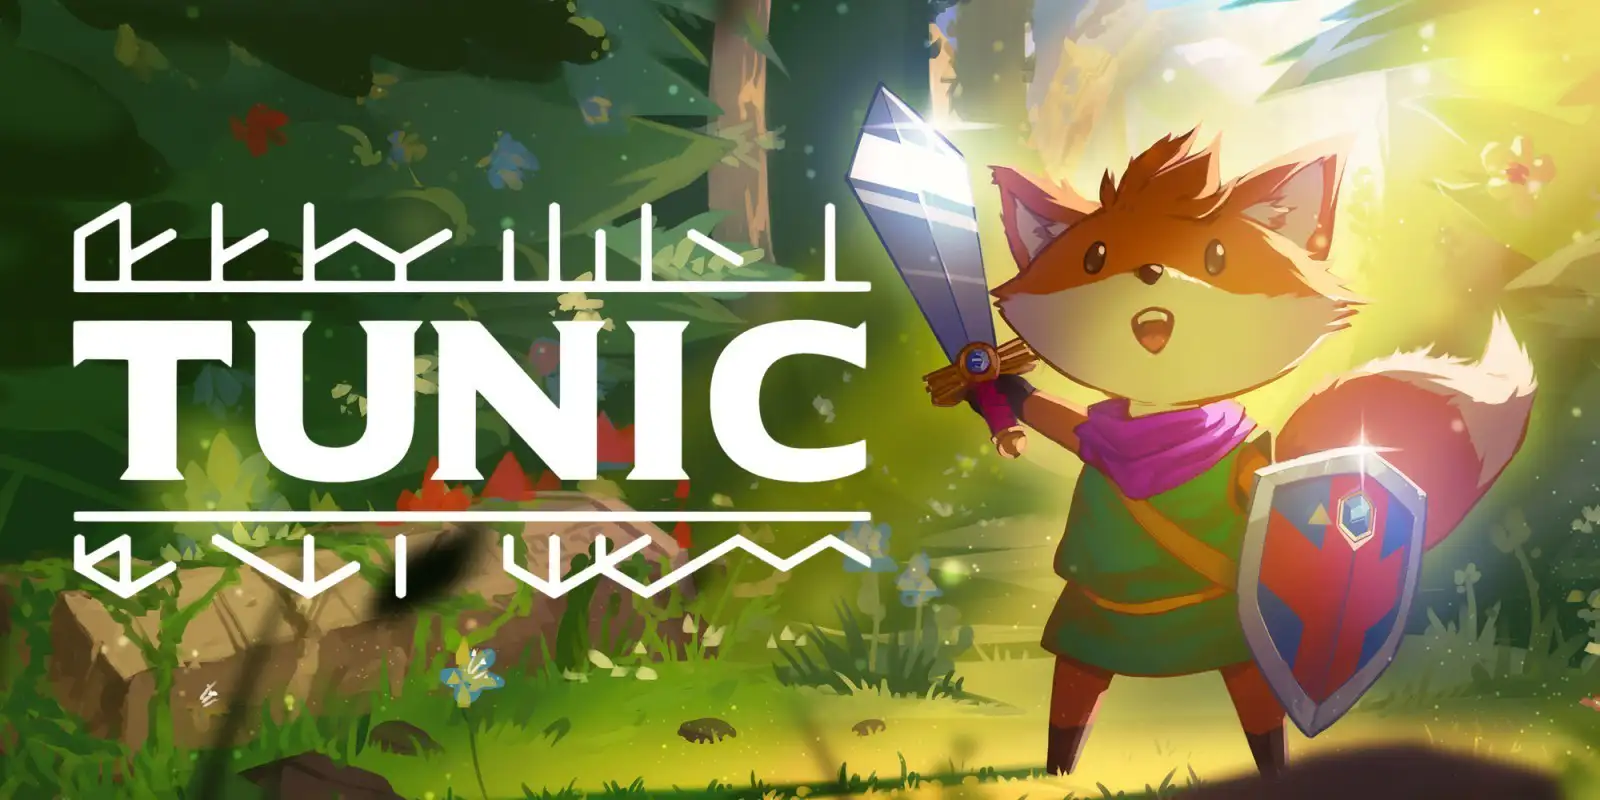 The logo of Tunic. A fox in a green tunic is raising a sword in a forest.